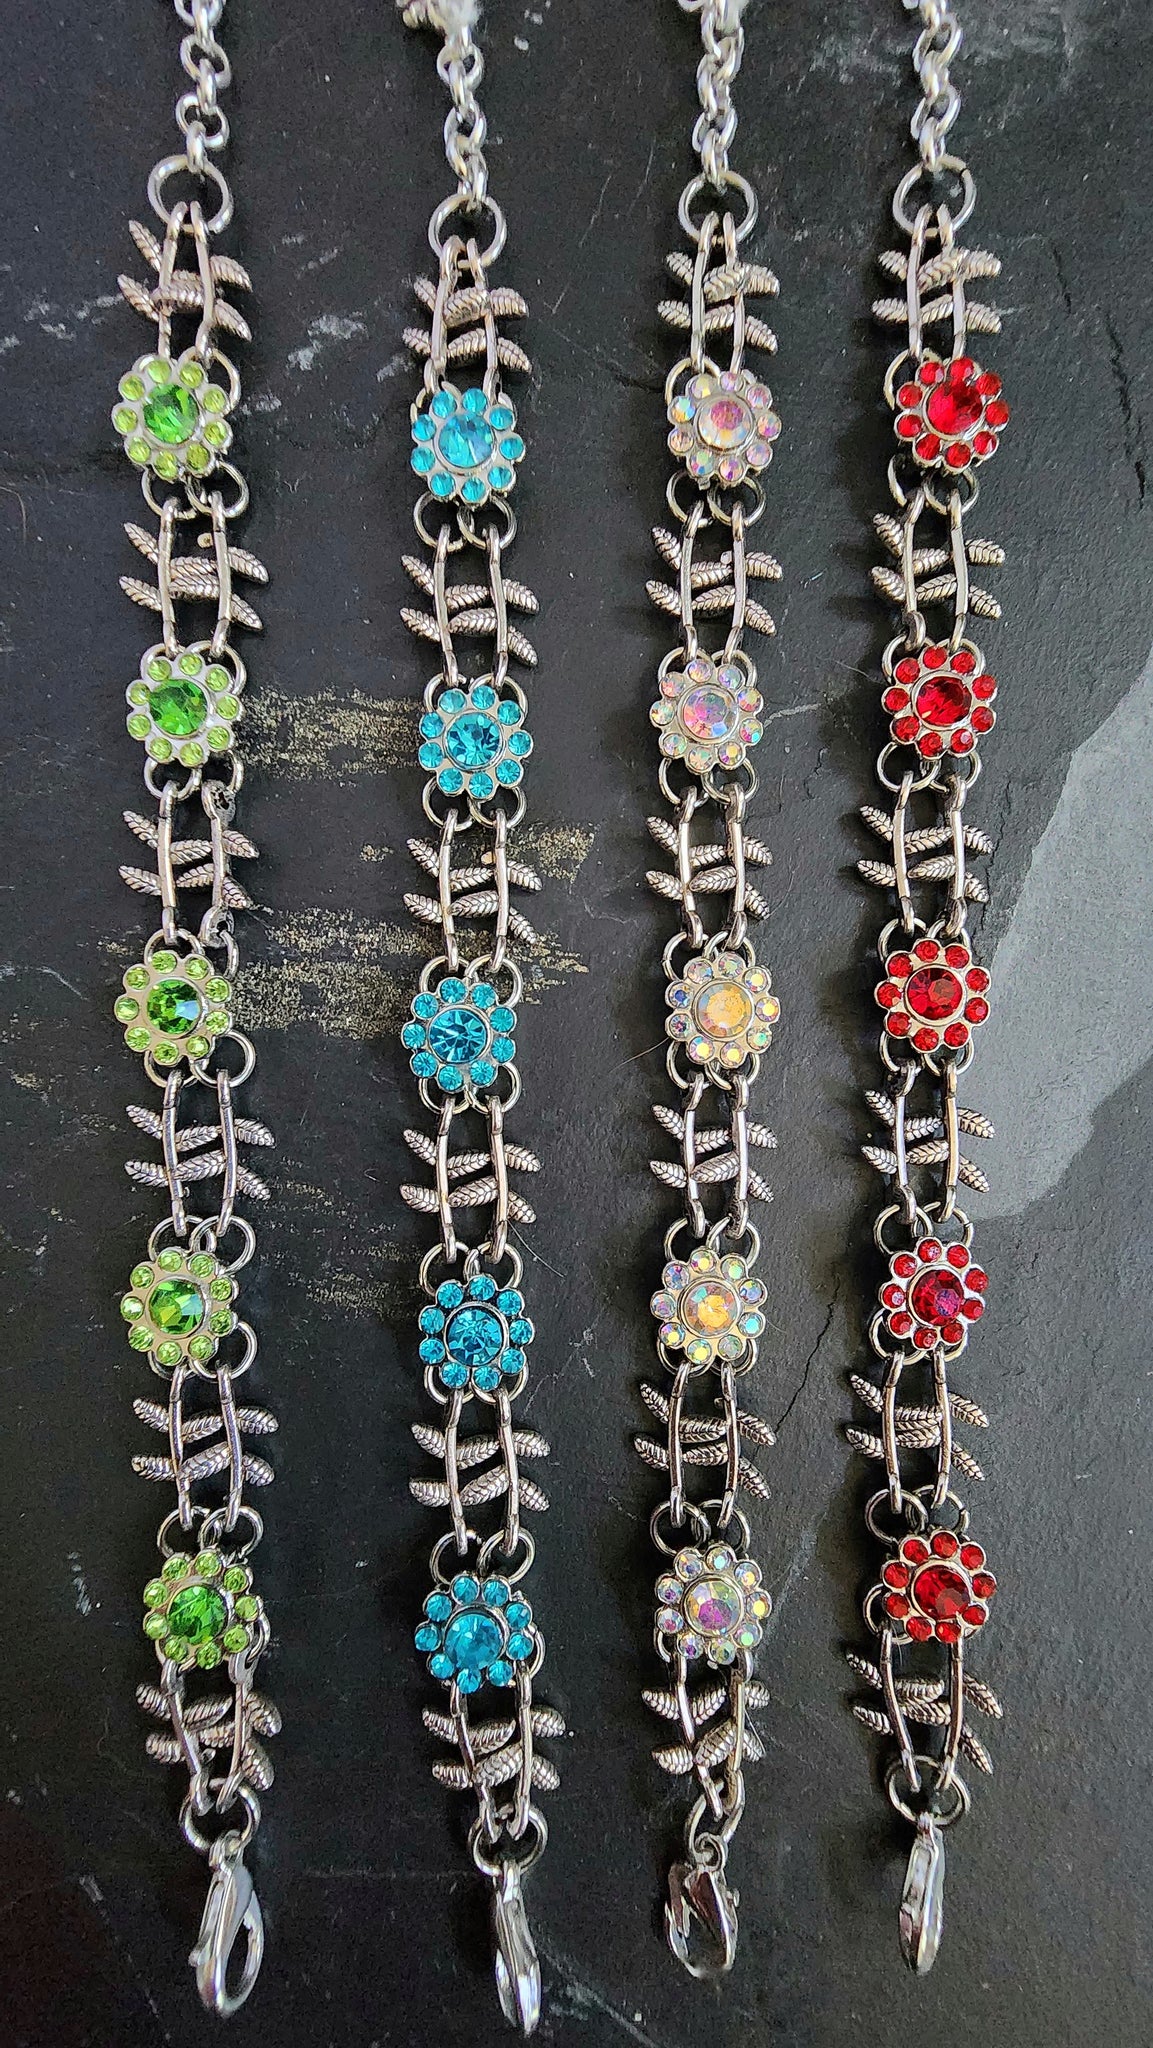 Rhinestone Flower Bracelet in Turquoise, Red, Green or AB